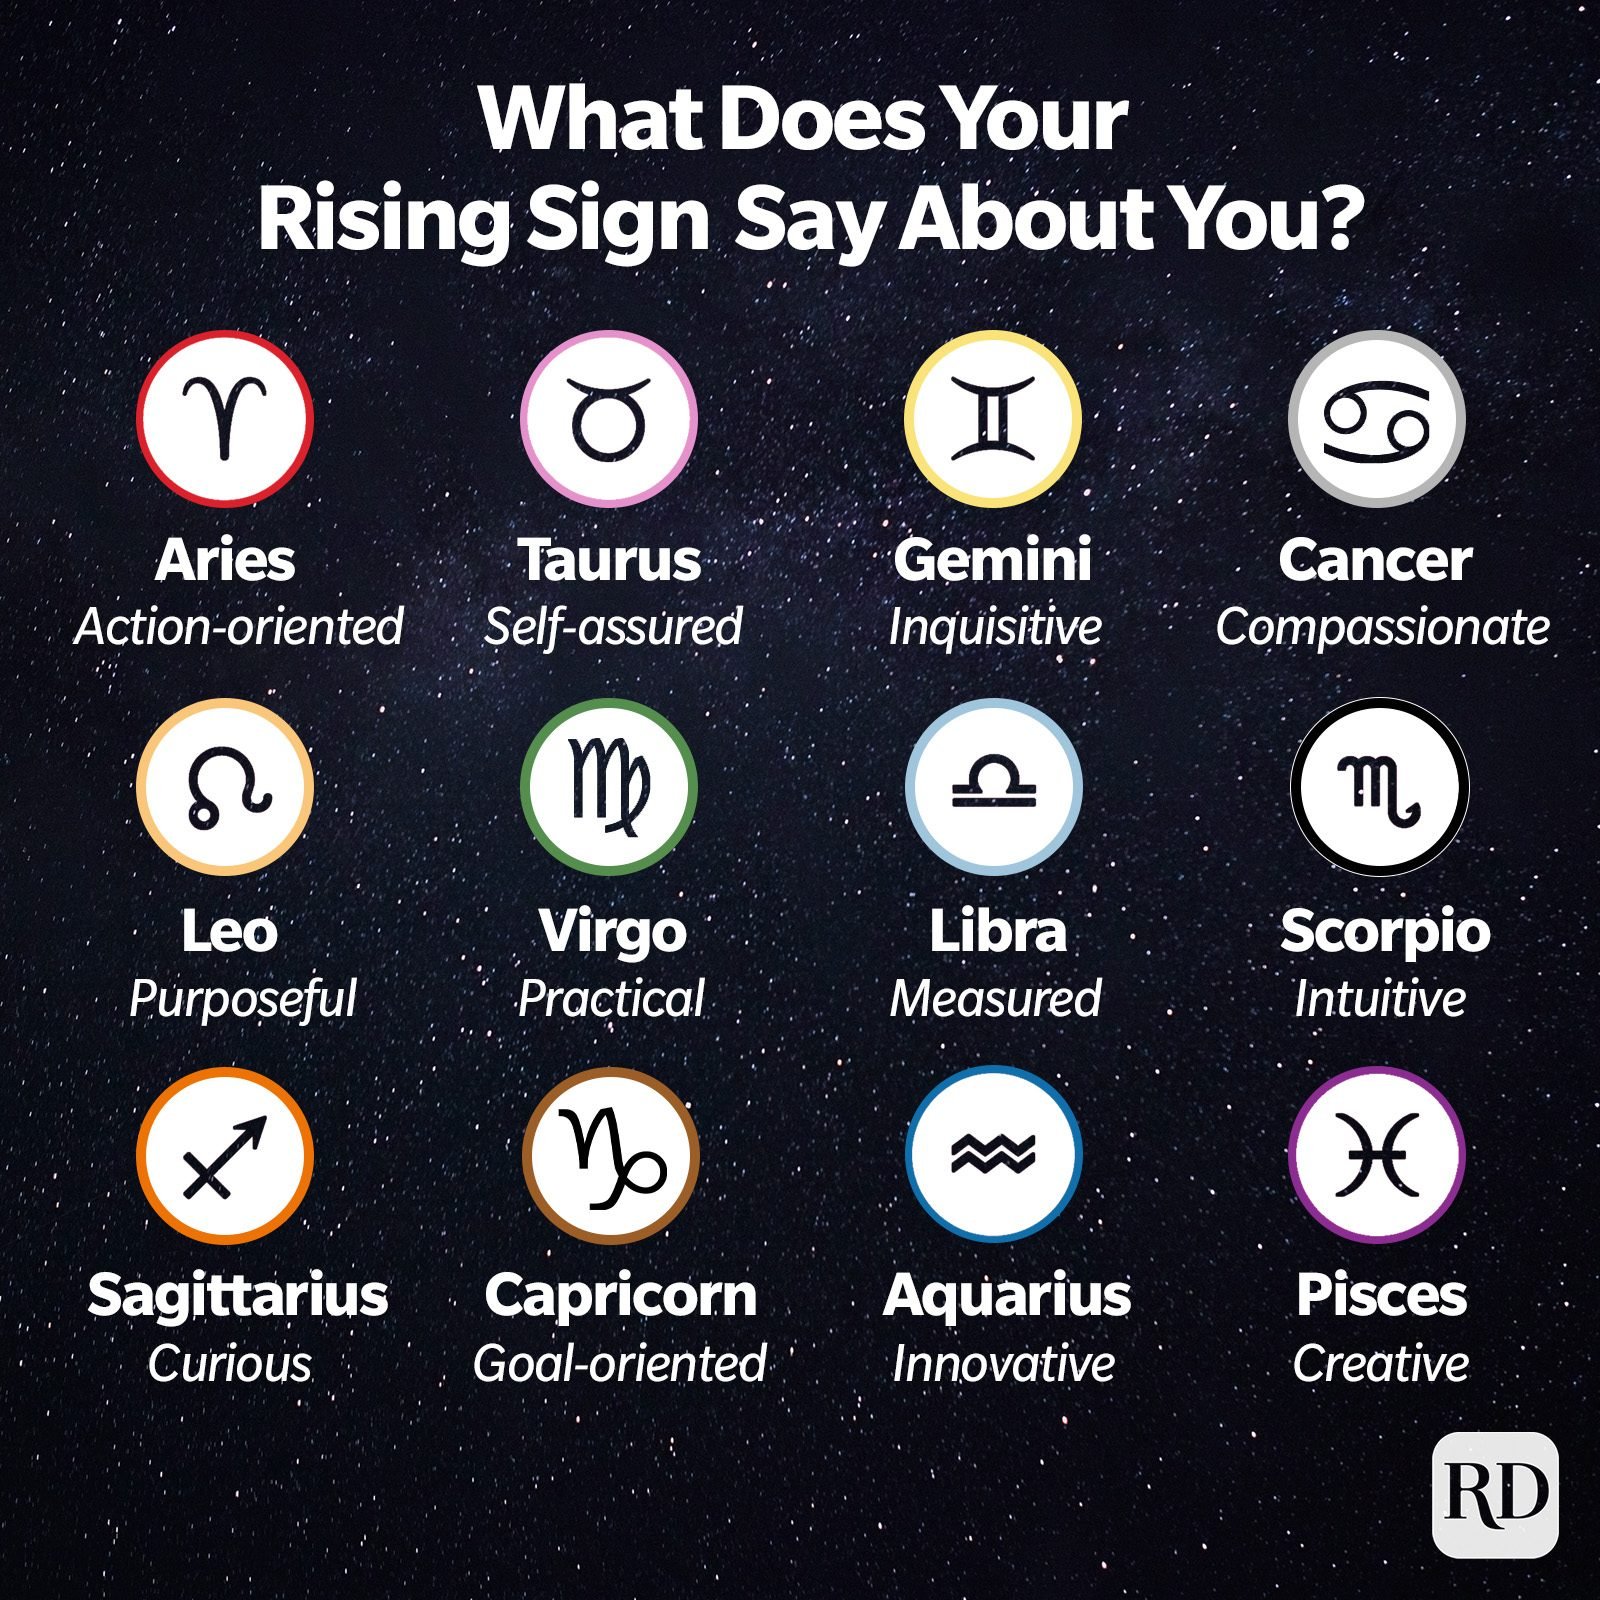 A Guide to Rising Signs: What They Mean and How to Find Yours